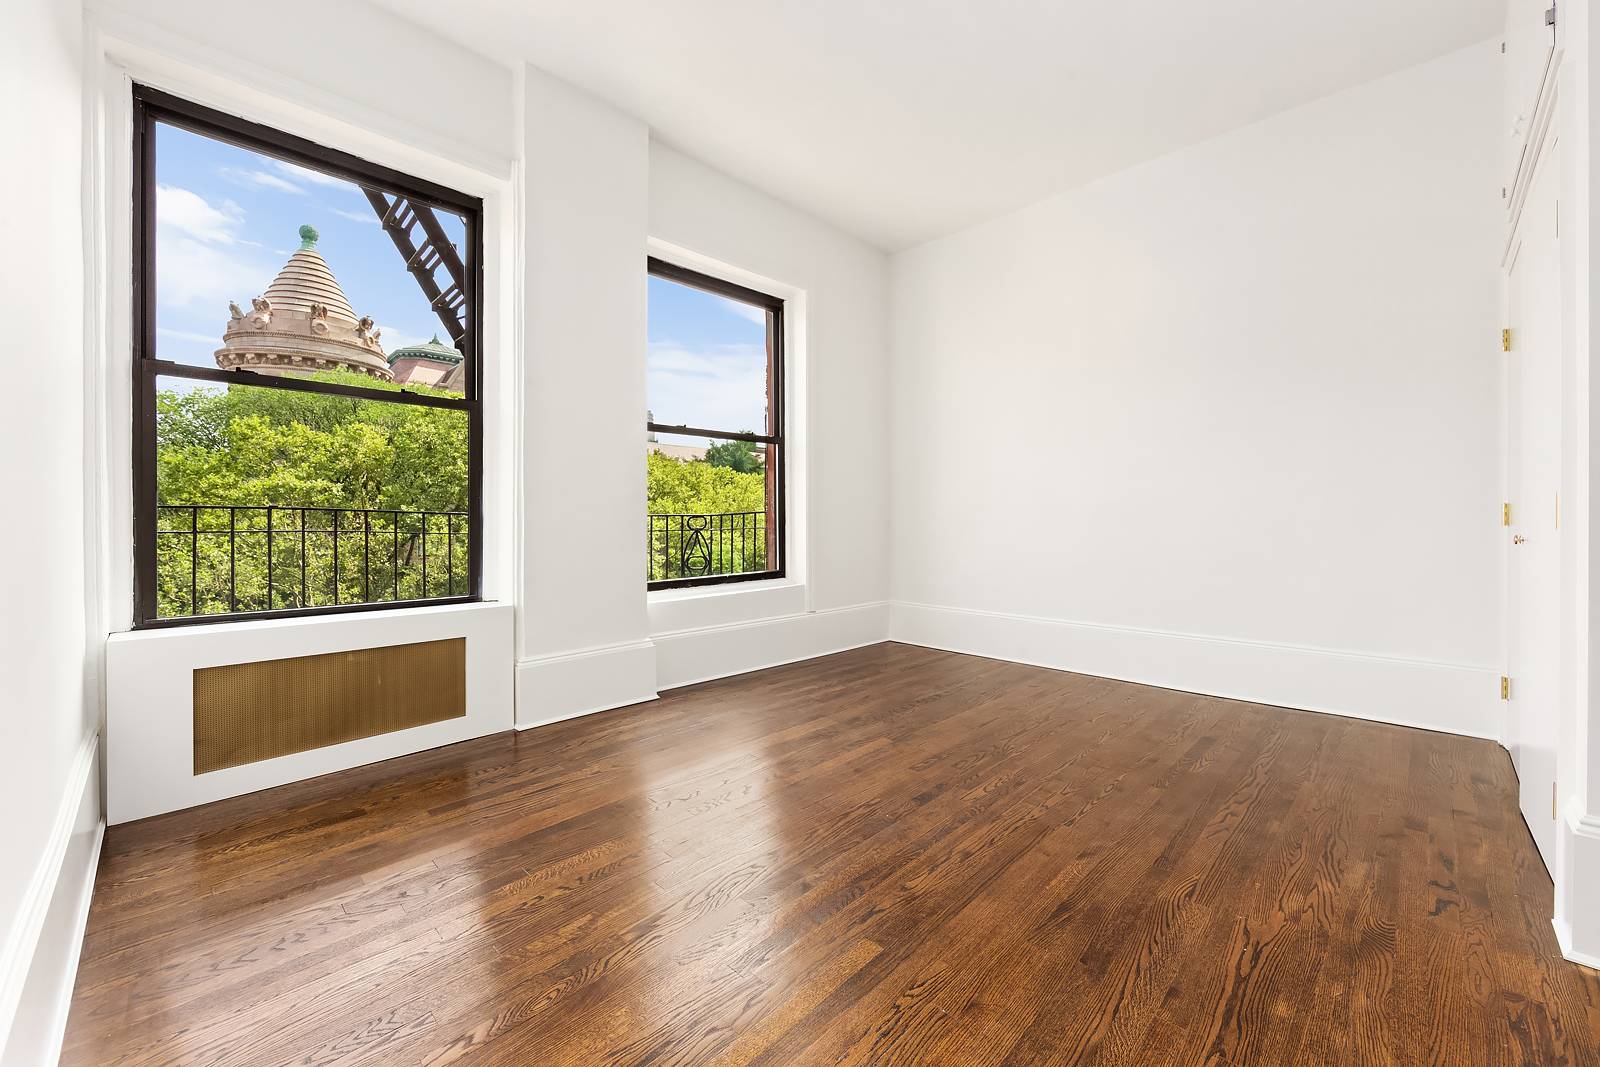 New gut renovated prewar apartment with beautiful views of the Museum of Natural History in an elevator building on the best corner on the Upper West Side!